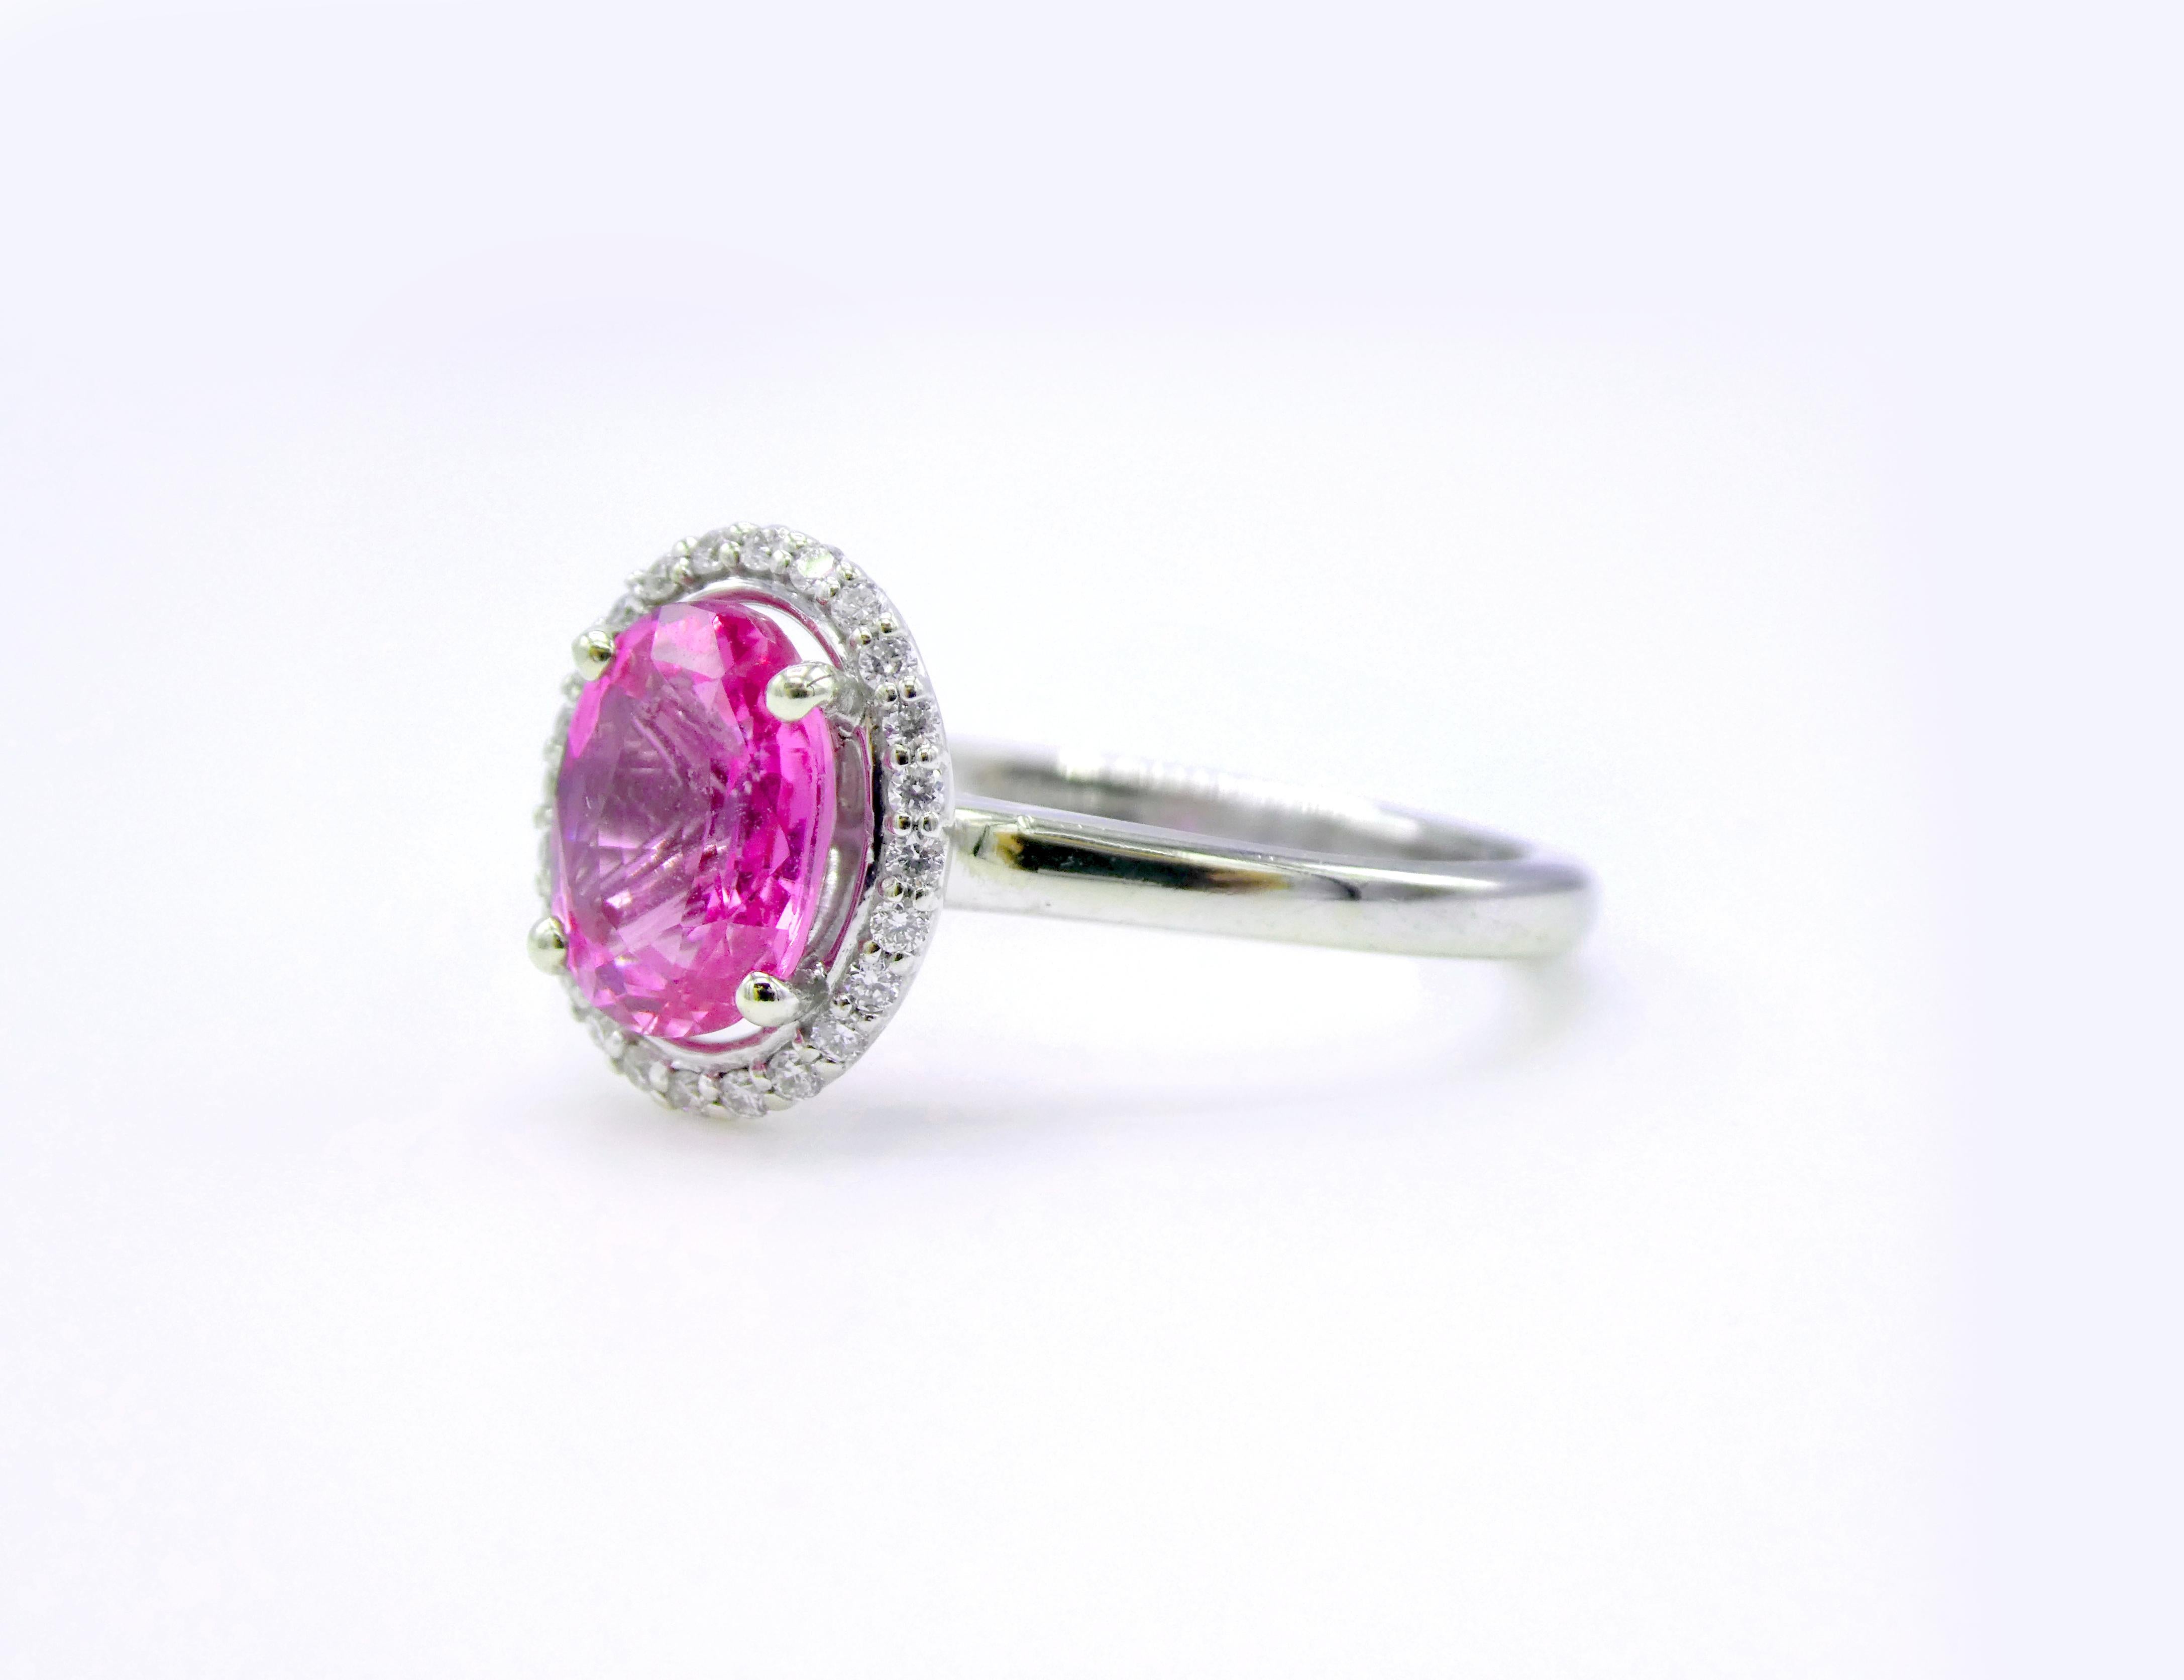 Contemporary GIA Certified 1.49 Carat Oval Pink Sapphire and Diamond Cocktail Ring